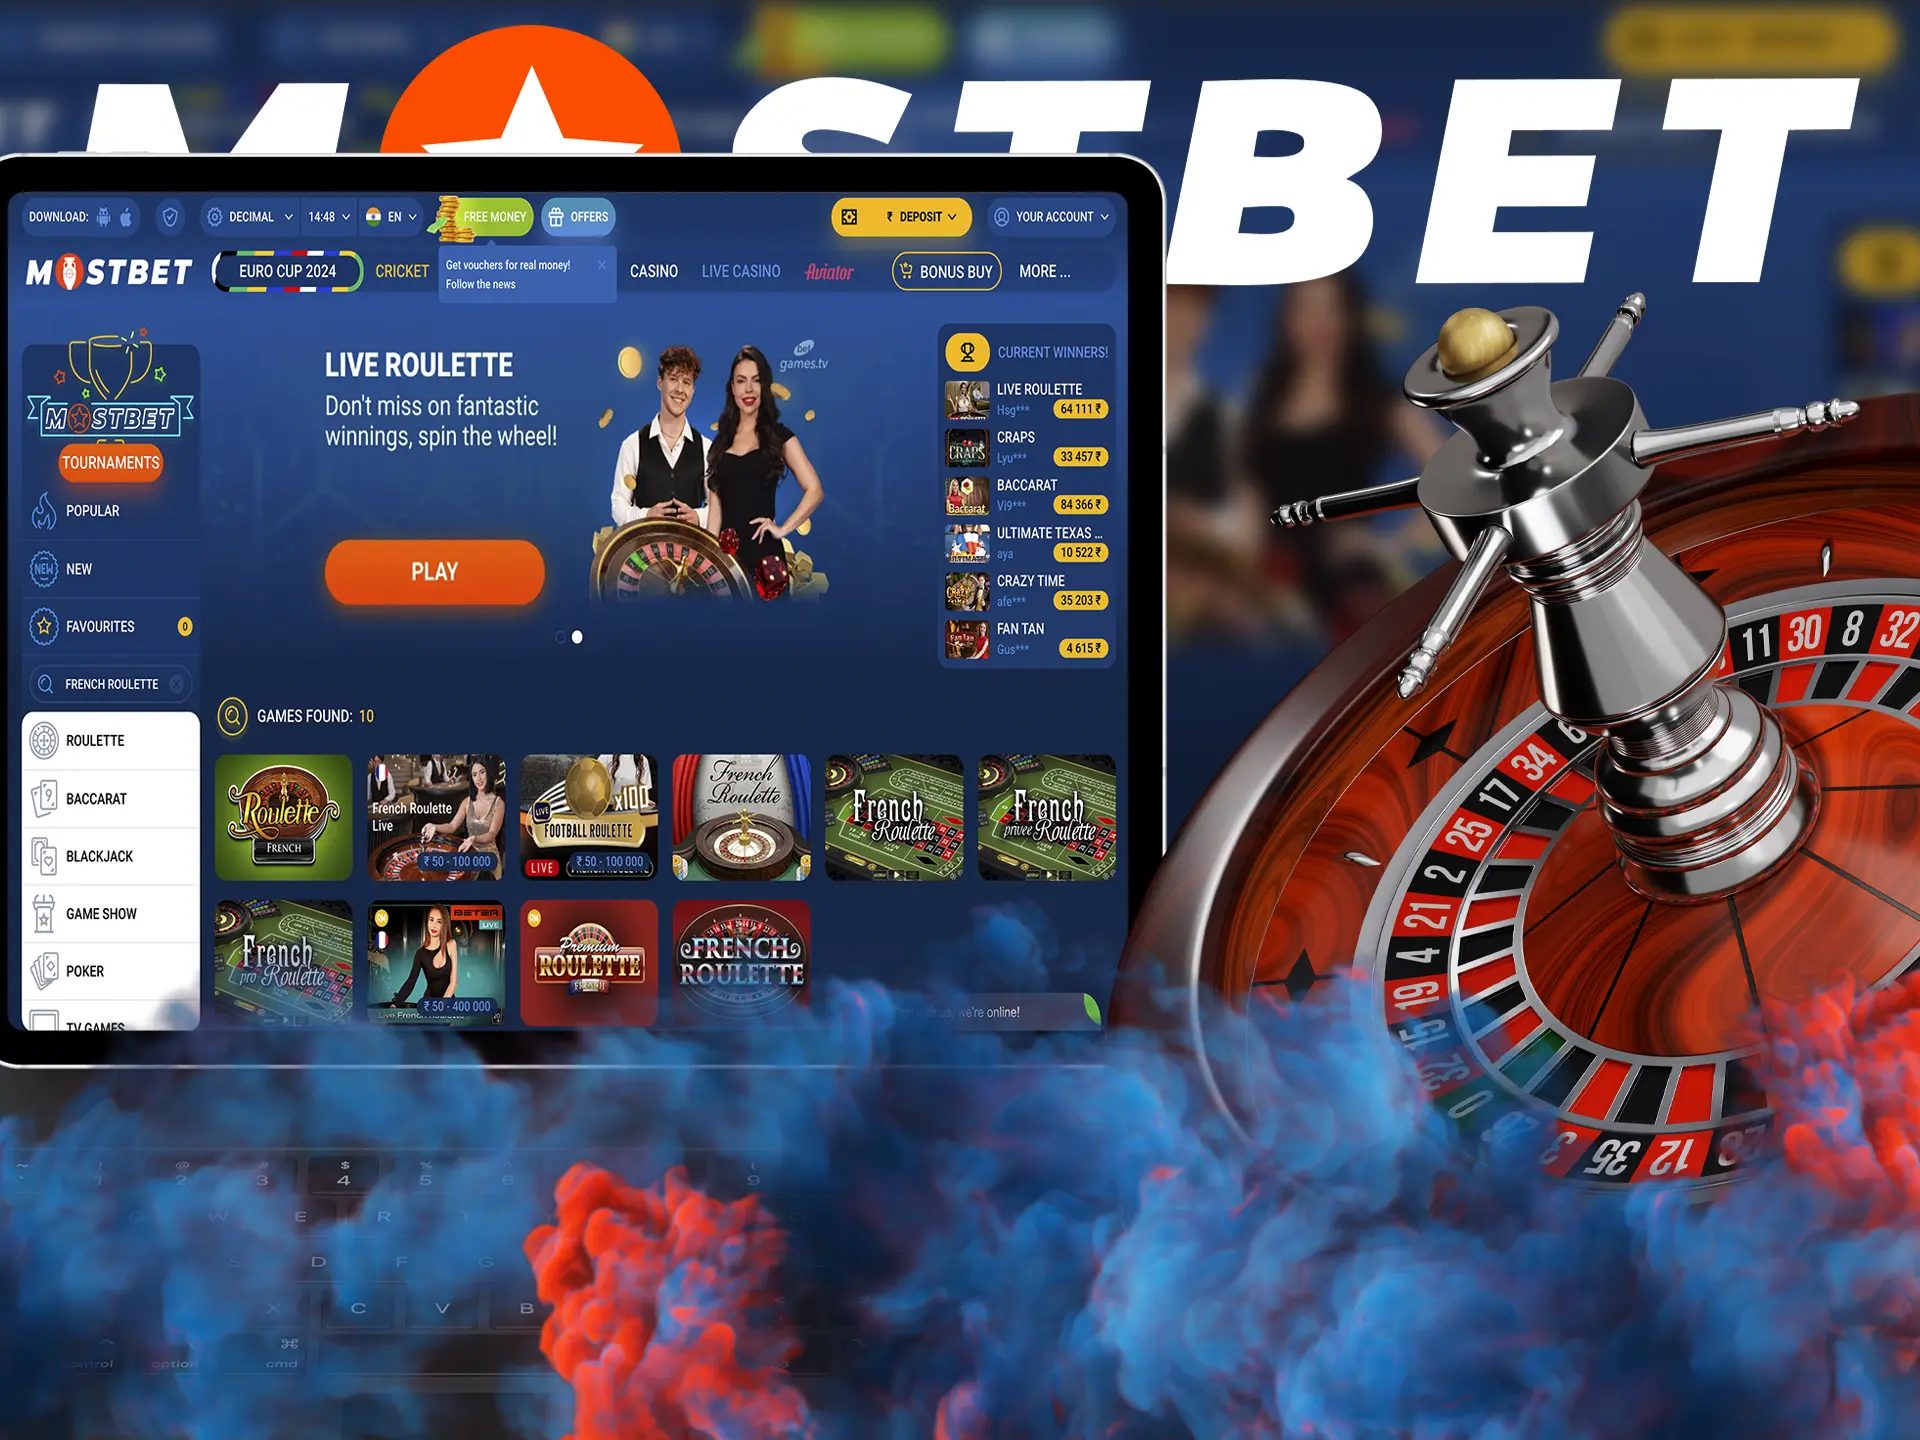 French Roulette from Mostbet Casino has the biggest wins waiting for you.